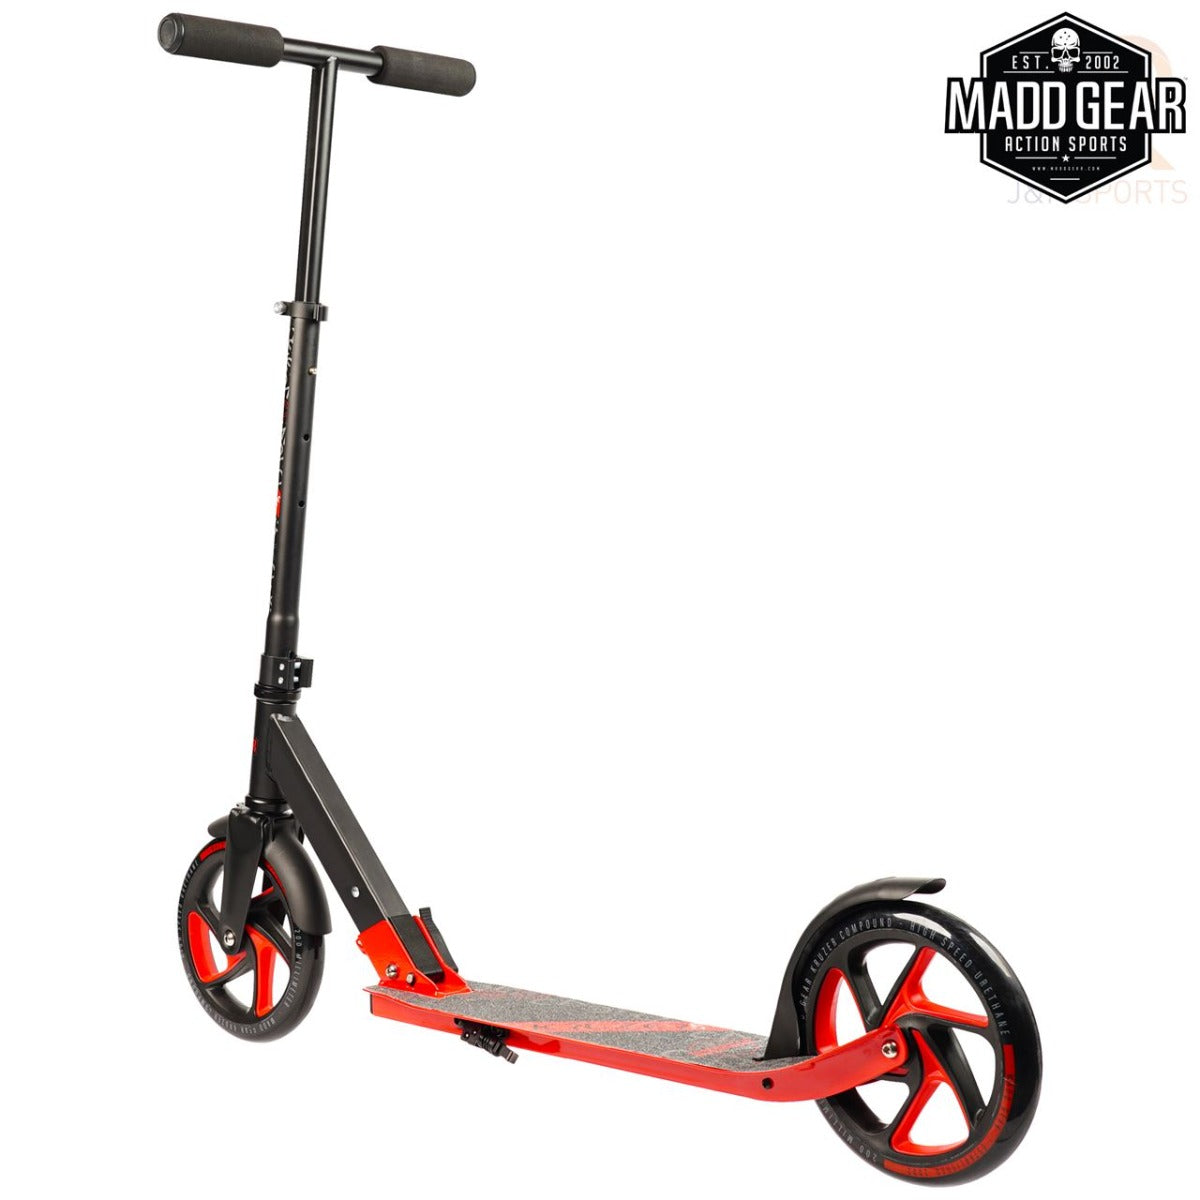 Madd Gear MGP Carve Kruzer 200 Commuter Foldable Scooter - Black / Red - Rear